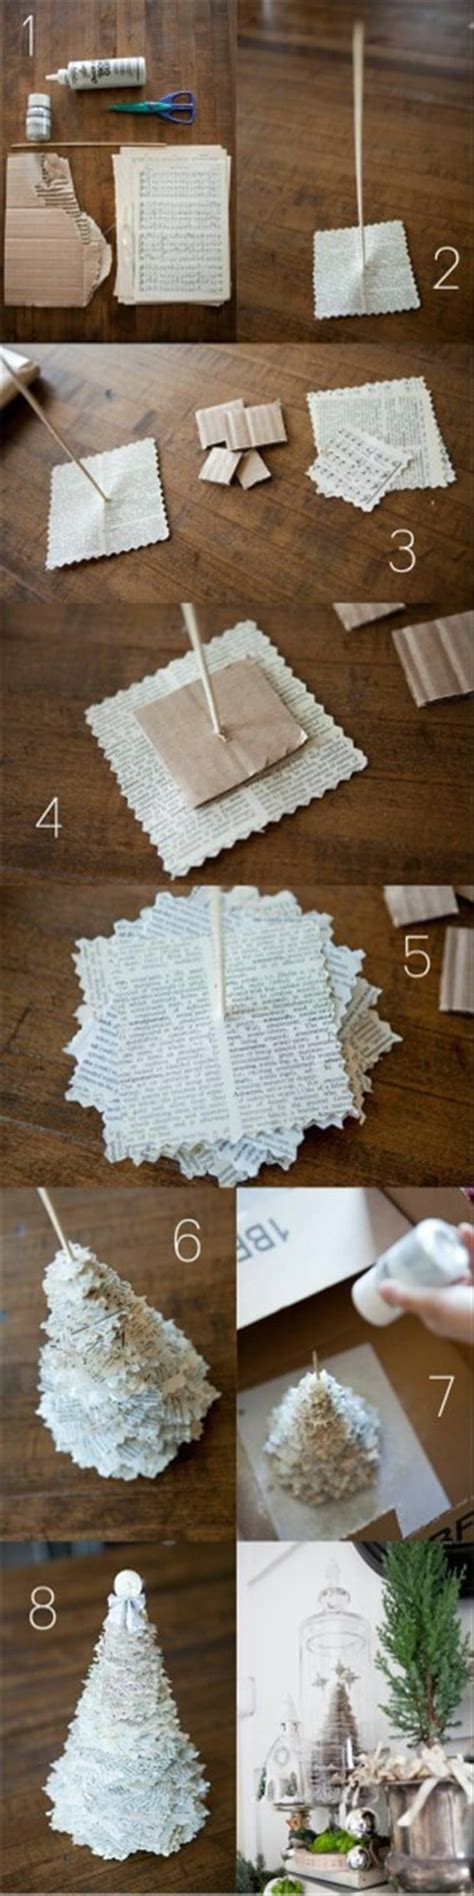 20 Genius Diy Recycled And Repurposed Christmas Crafts Diy And Crafts